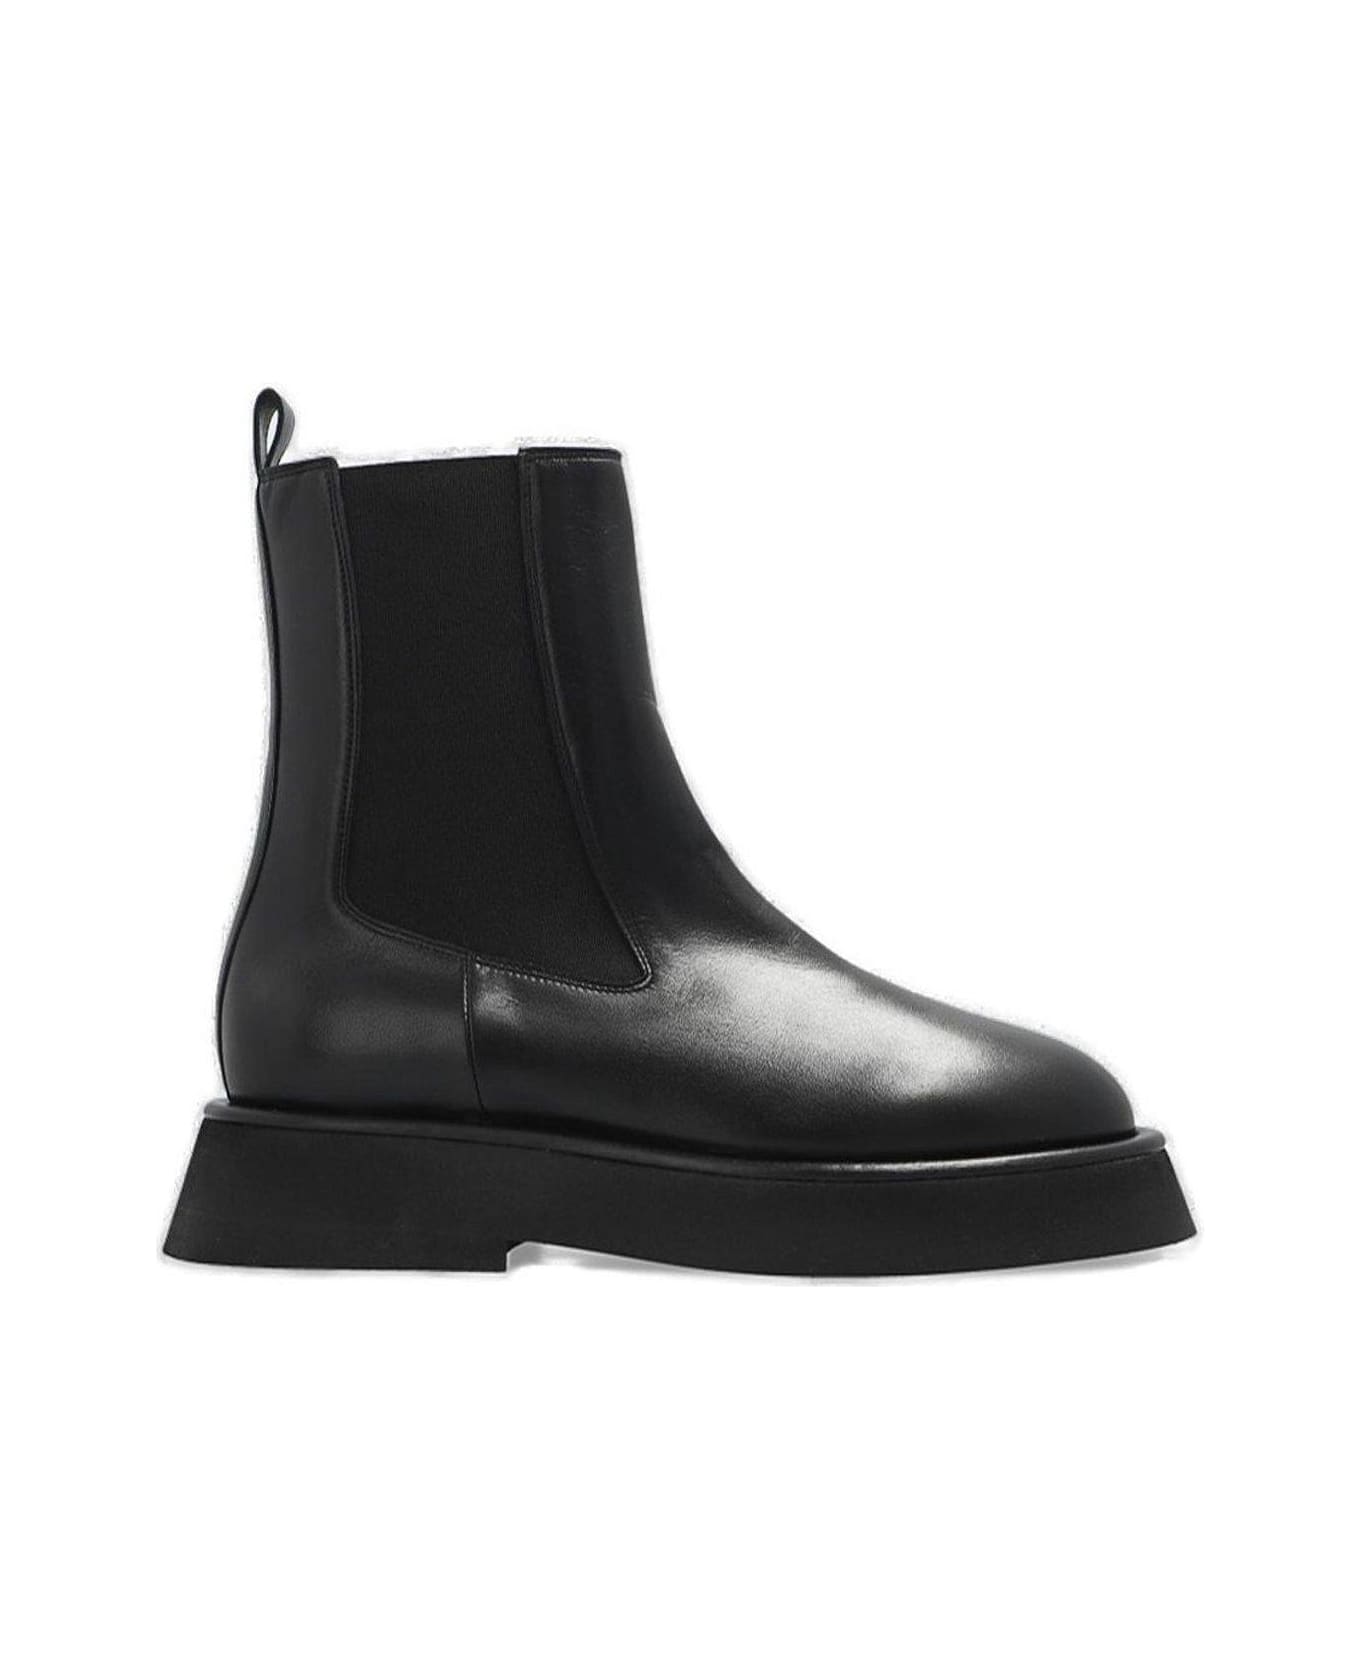 Wandler Panelled Ankle Boots - Black ブーツ